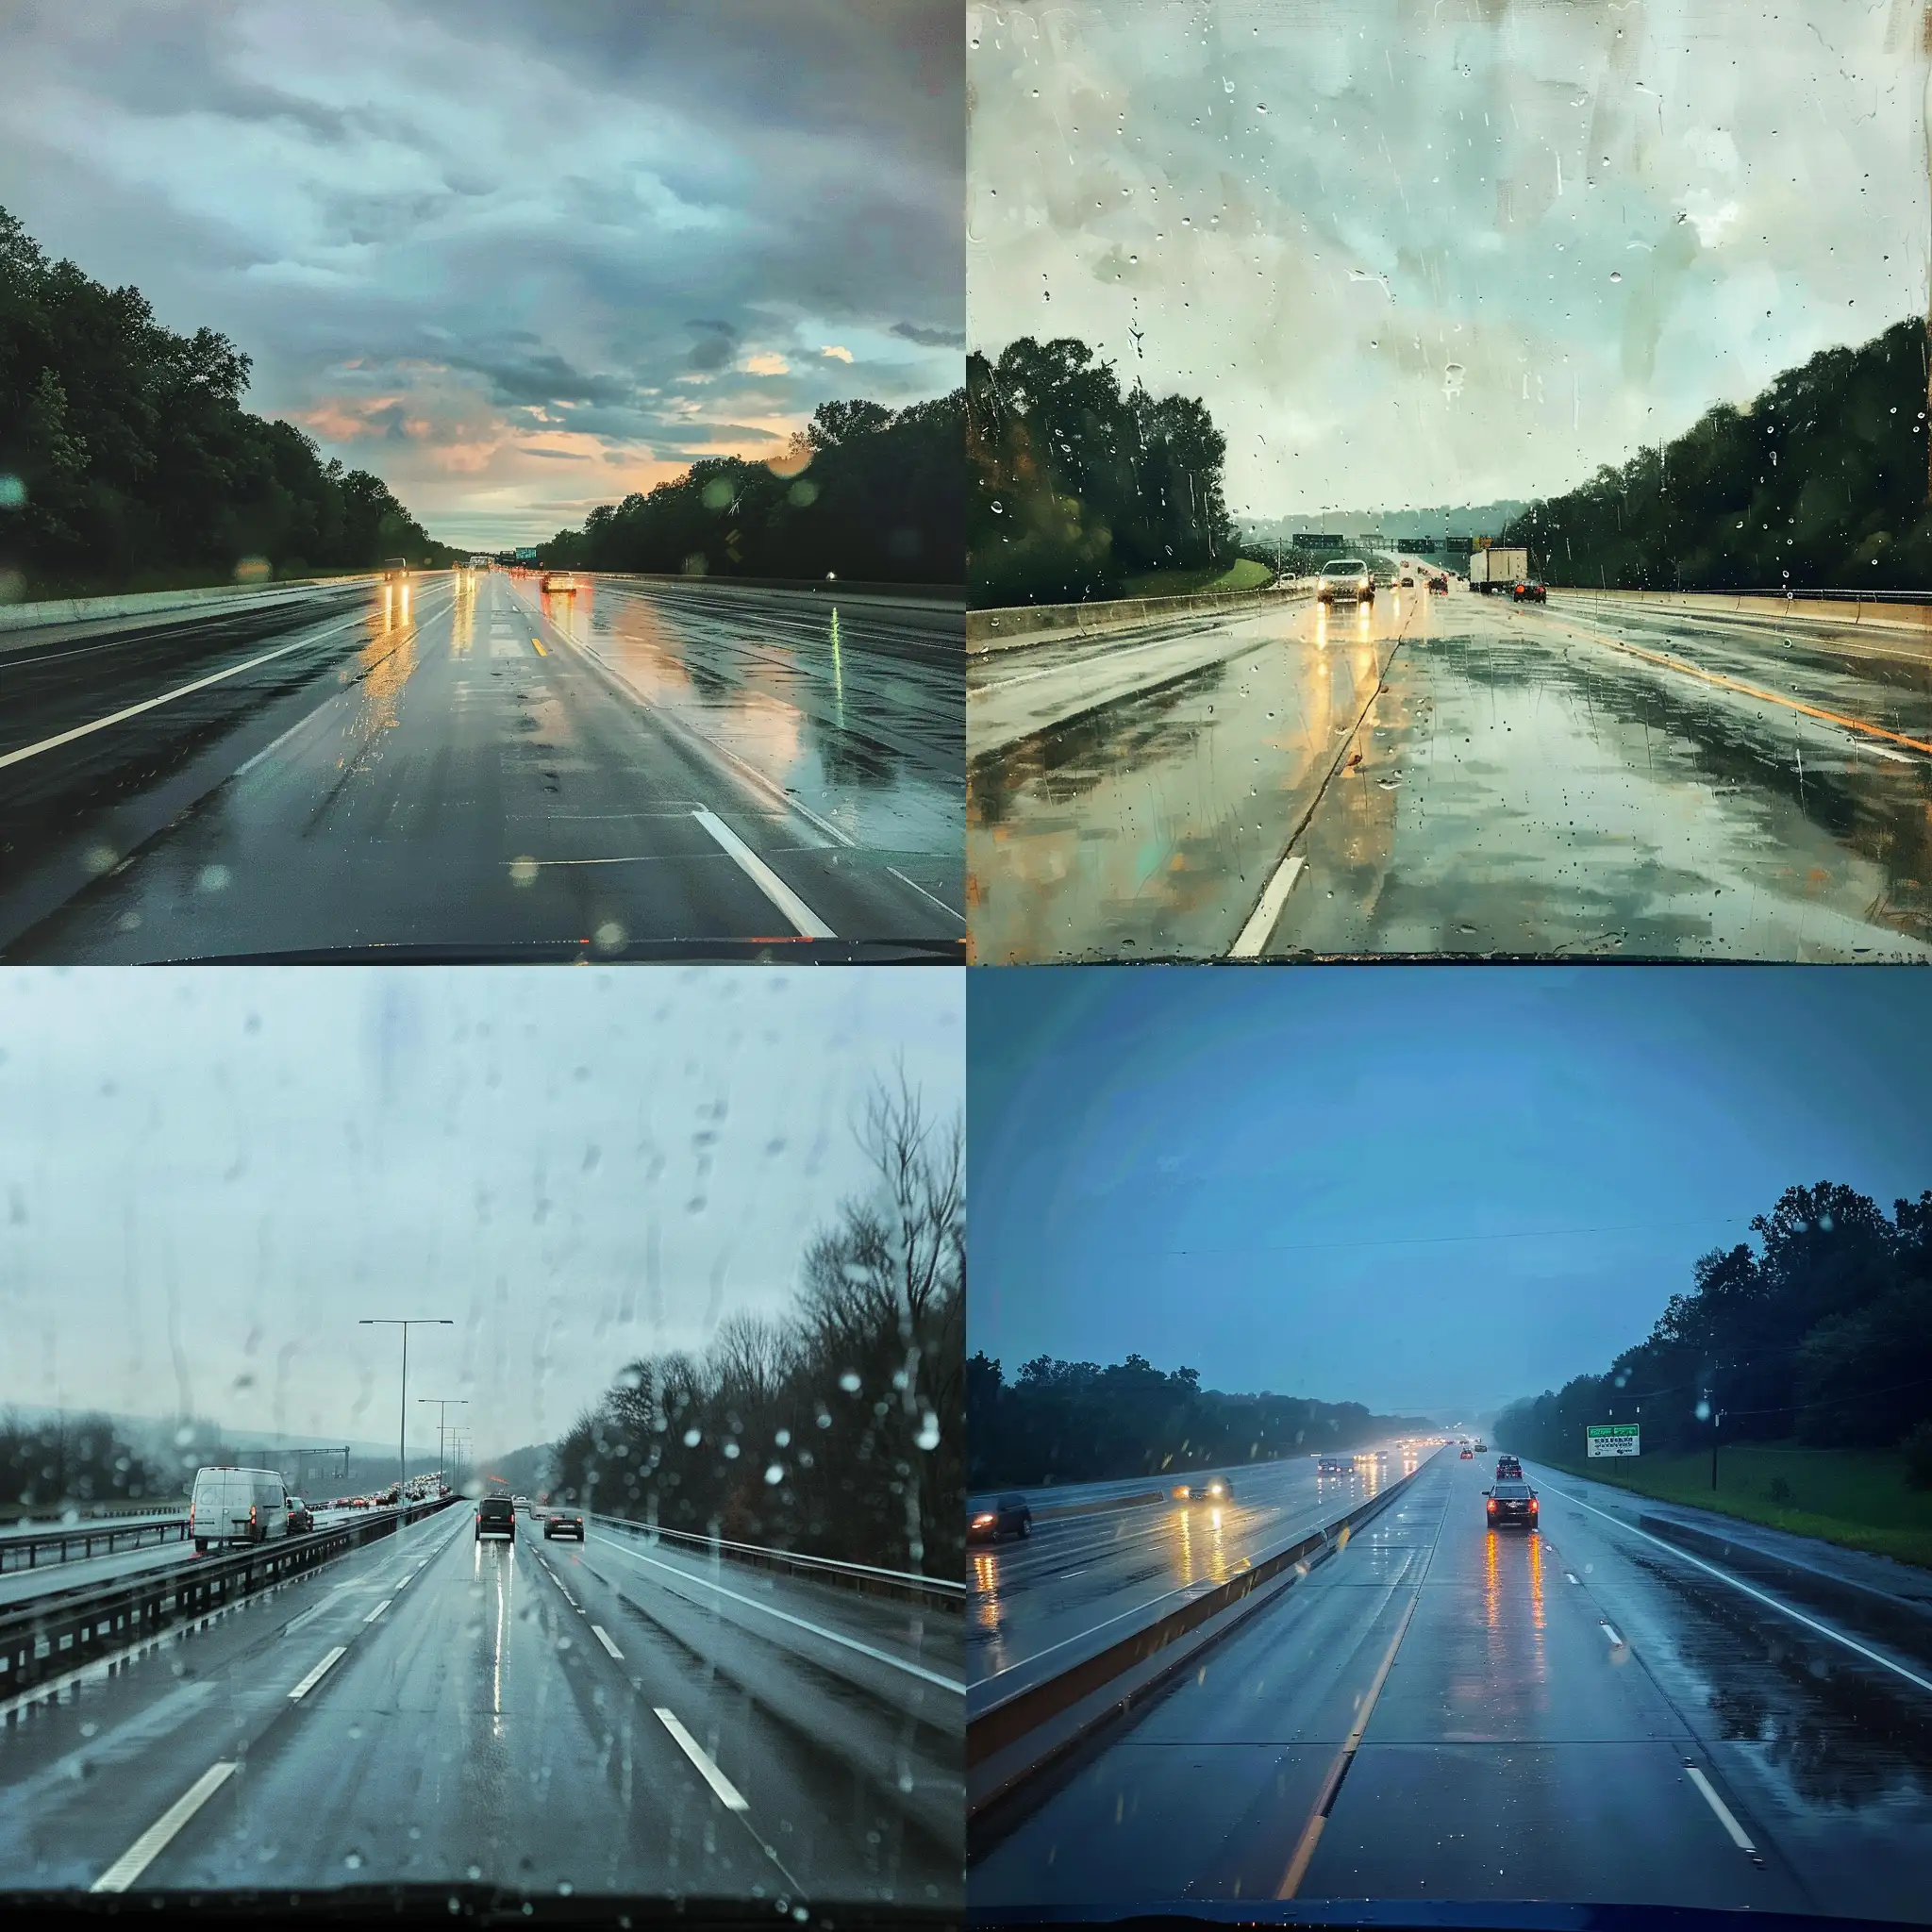 rainy day on the highway